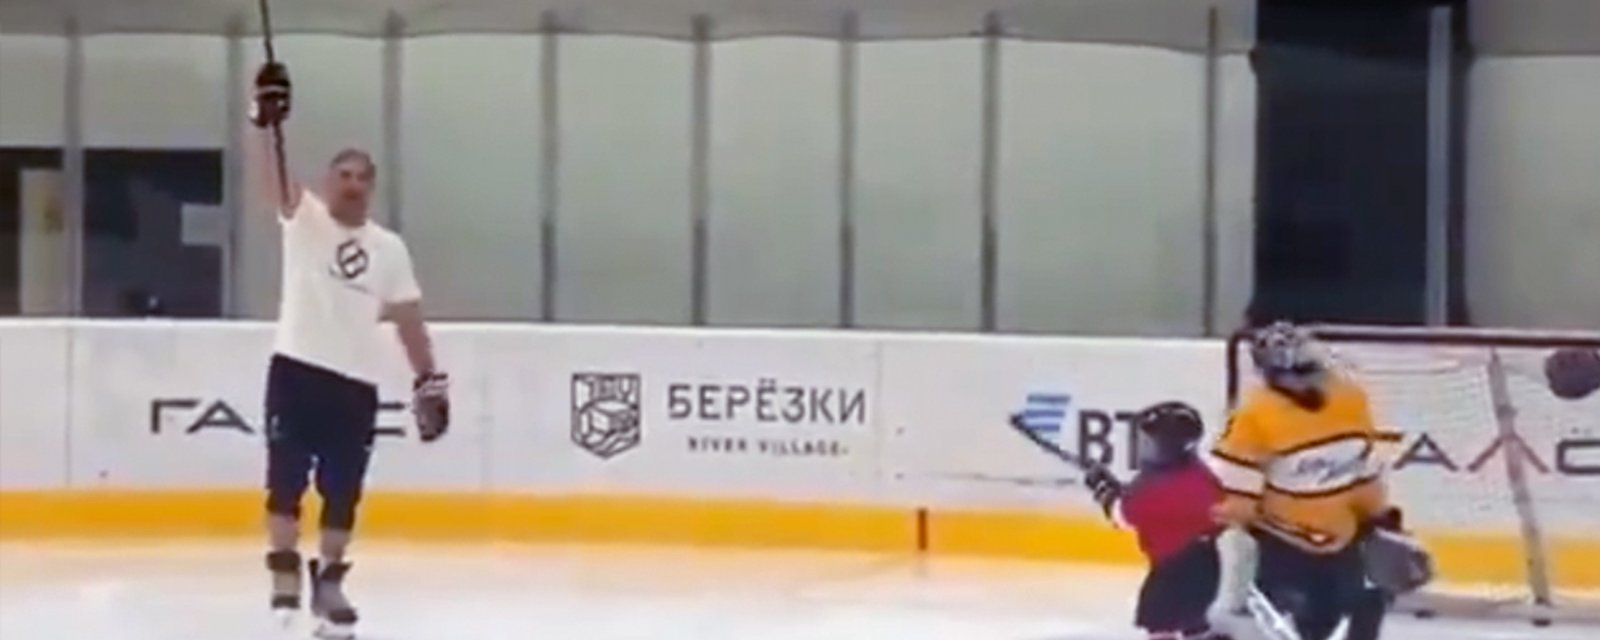 Sergei Ovechkin (2036 NHL Draft Eligible) rockets home a one-timer from the slot